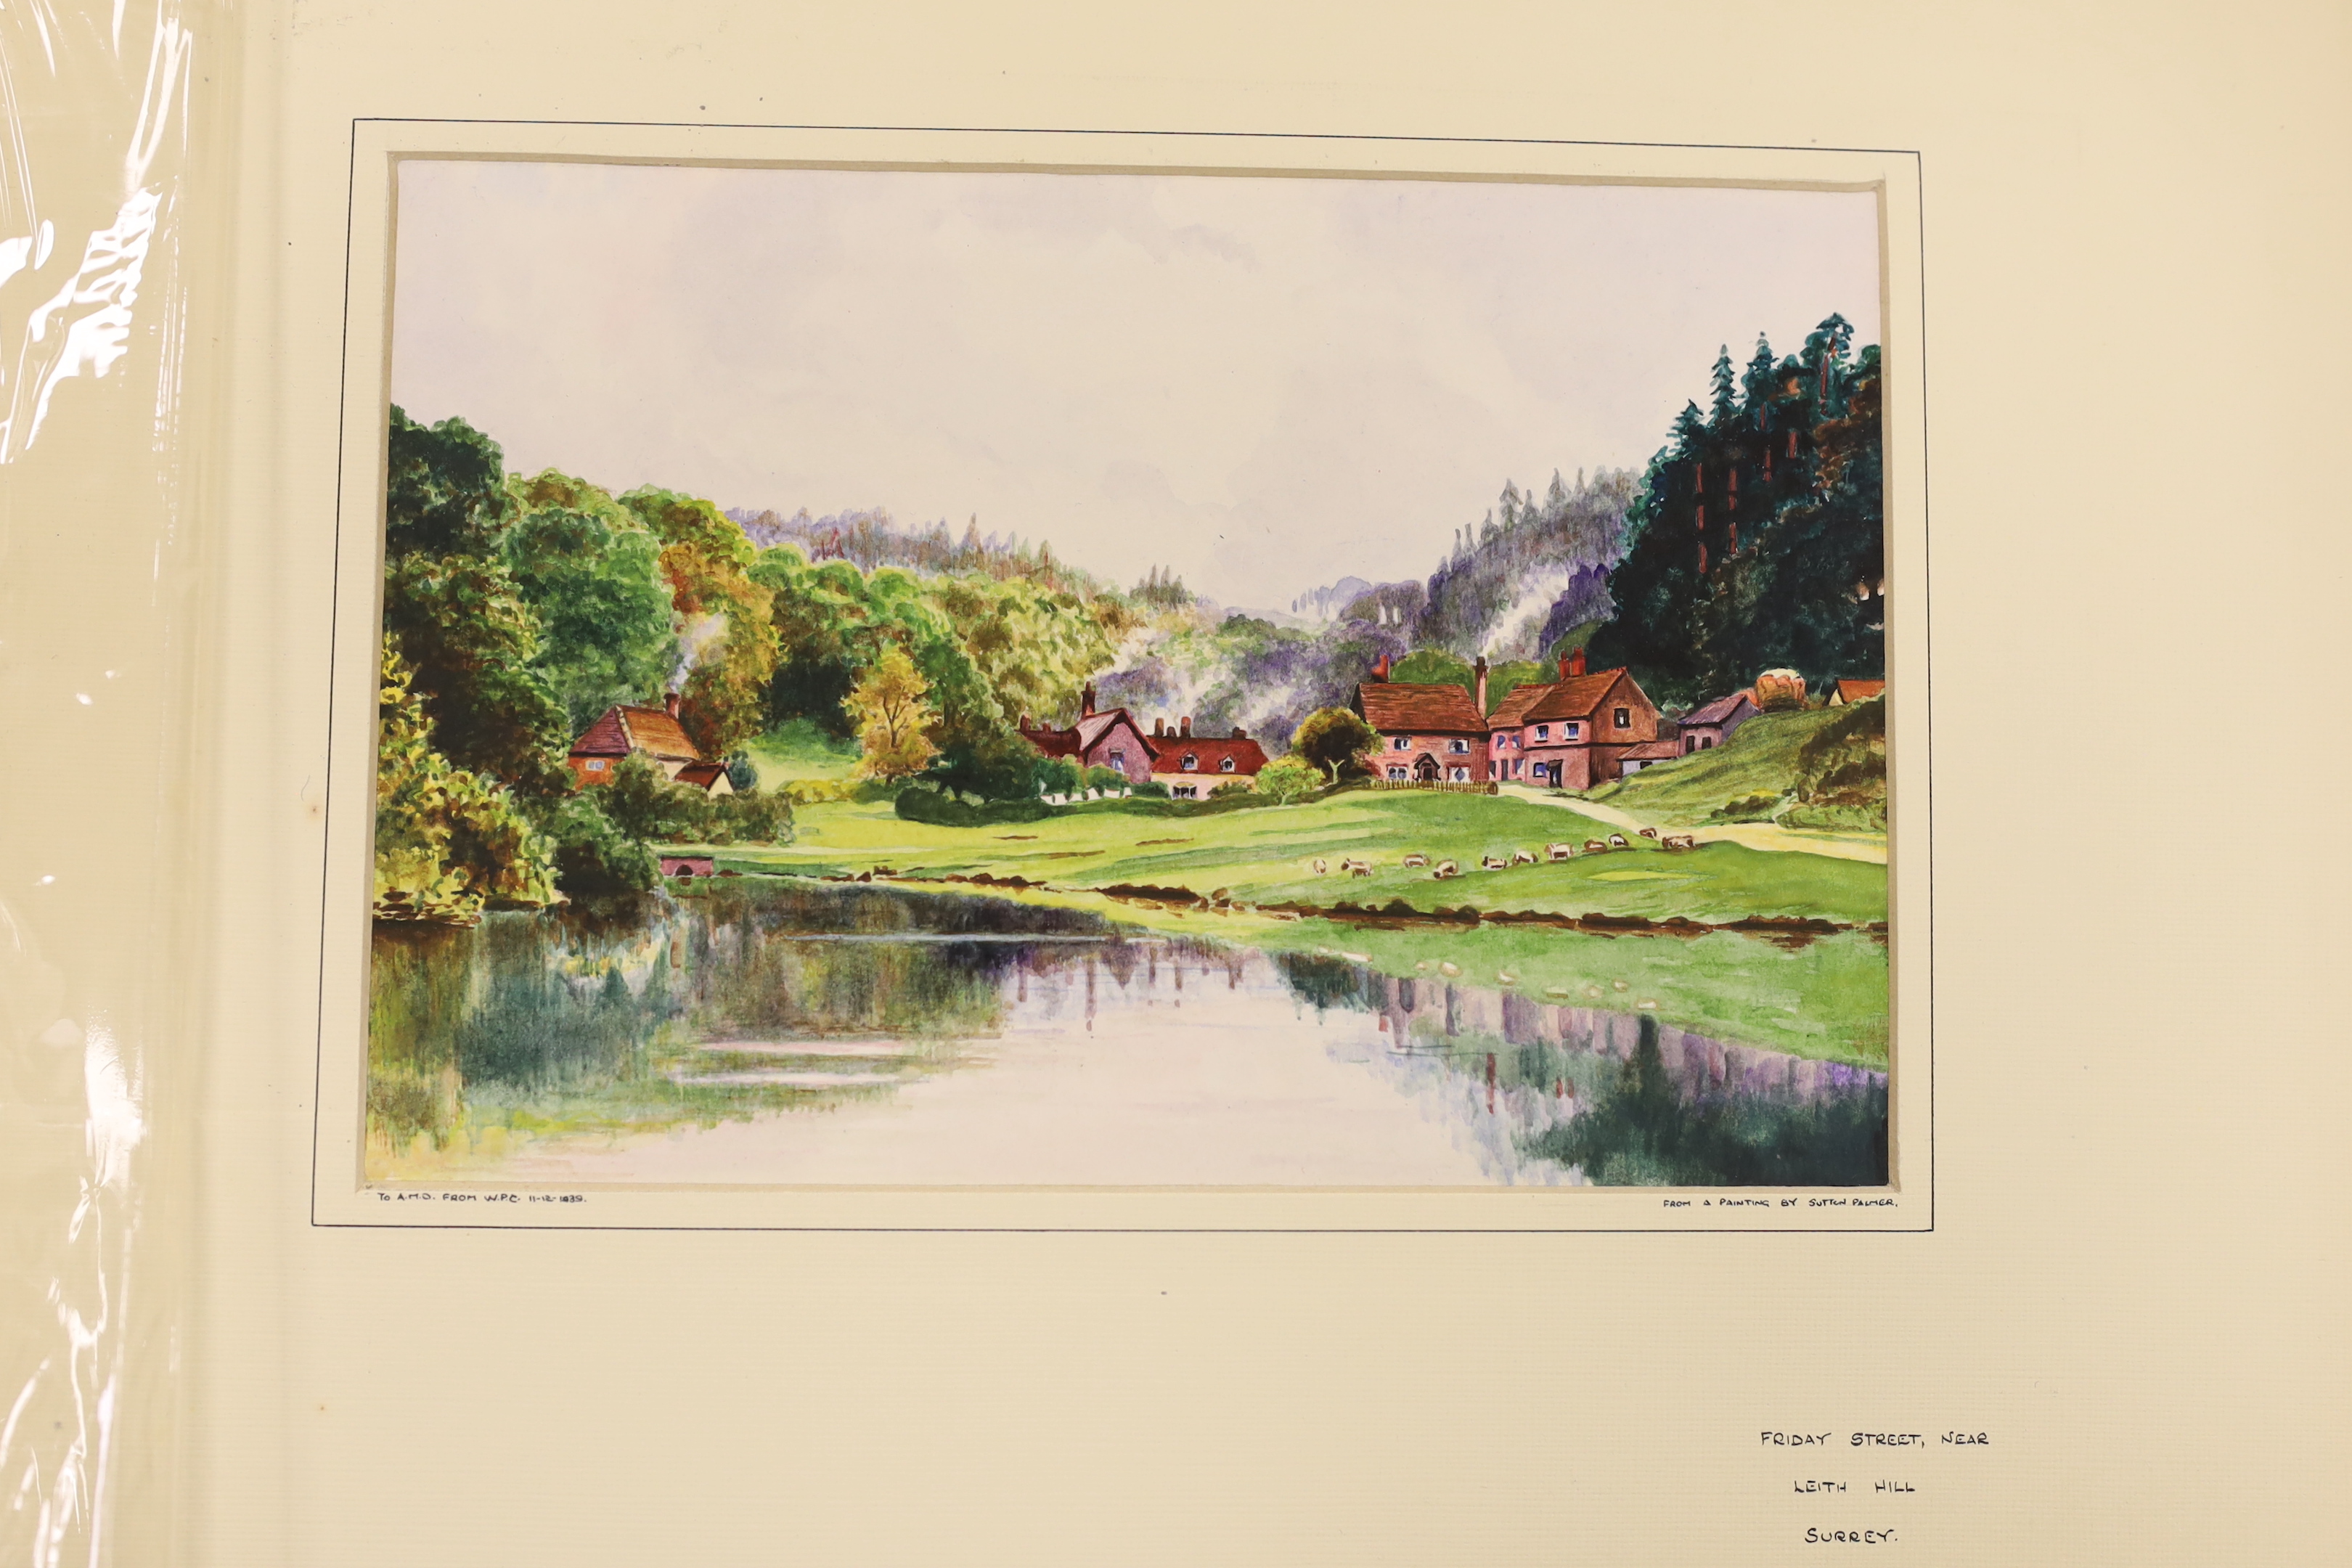 Two 20th century albums of watercolours, pencil sketches, prints, and black and white photographs including many after Sutton Palmer, river landscapes and other scenes around England